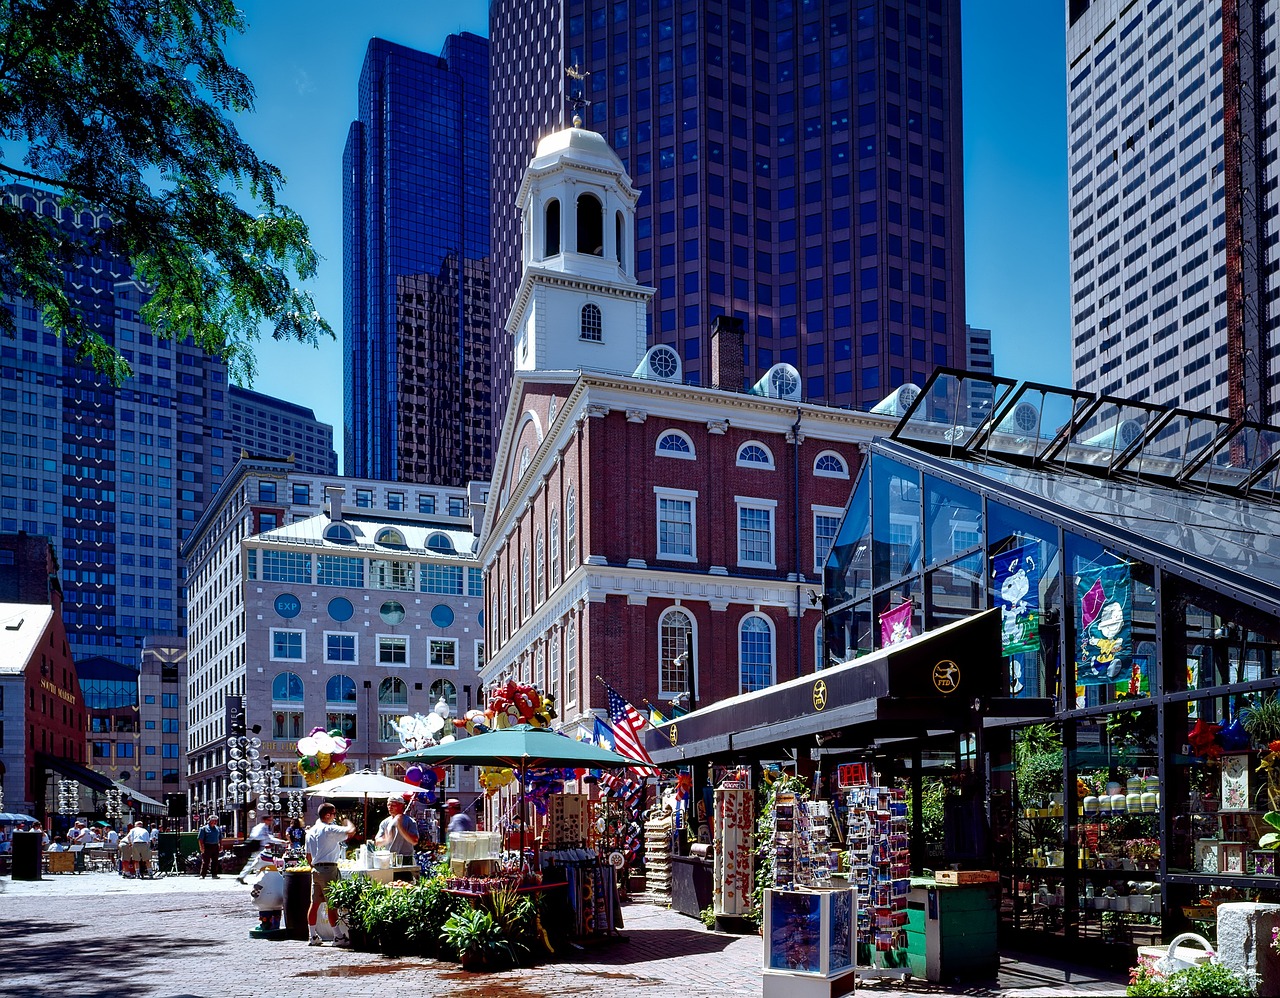 Historical and Culinary Delights in Boston